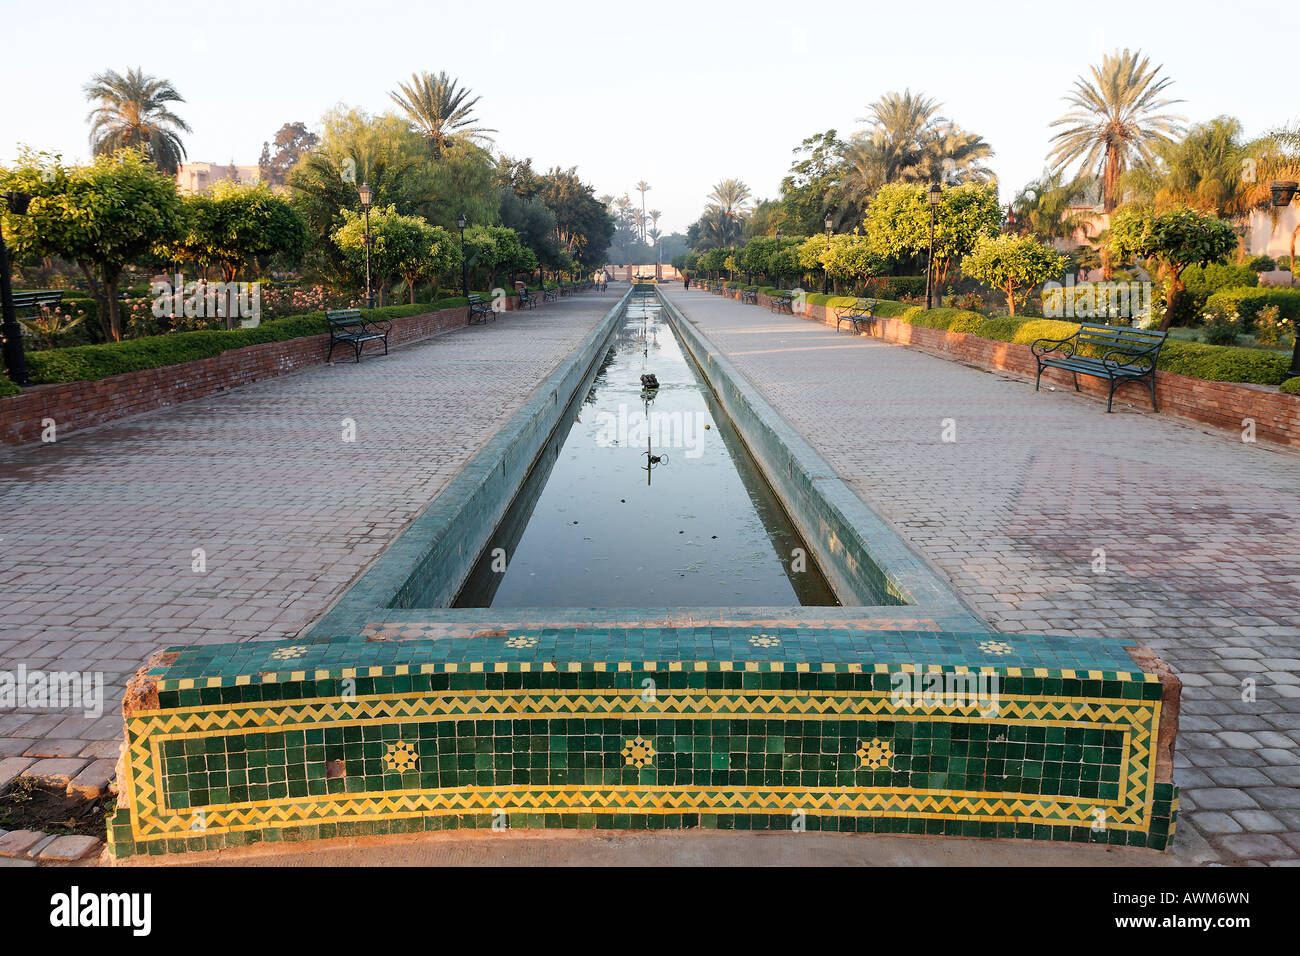 Water basin in the rose gardens of Koutoubia mosque, Marrakech, Morocco, Africa Stock Photo